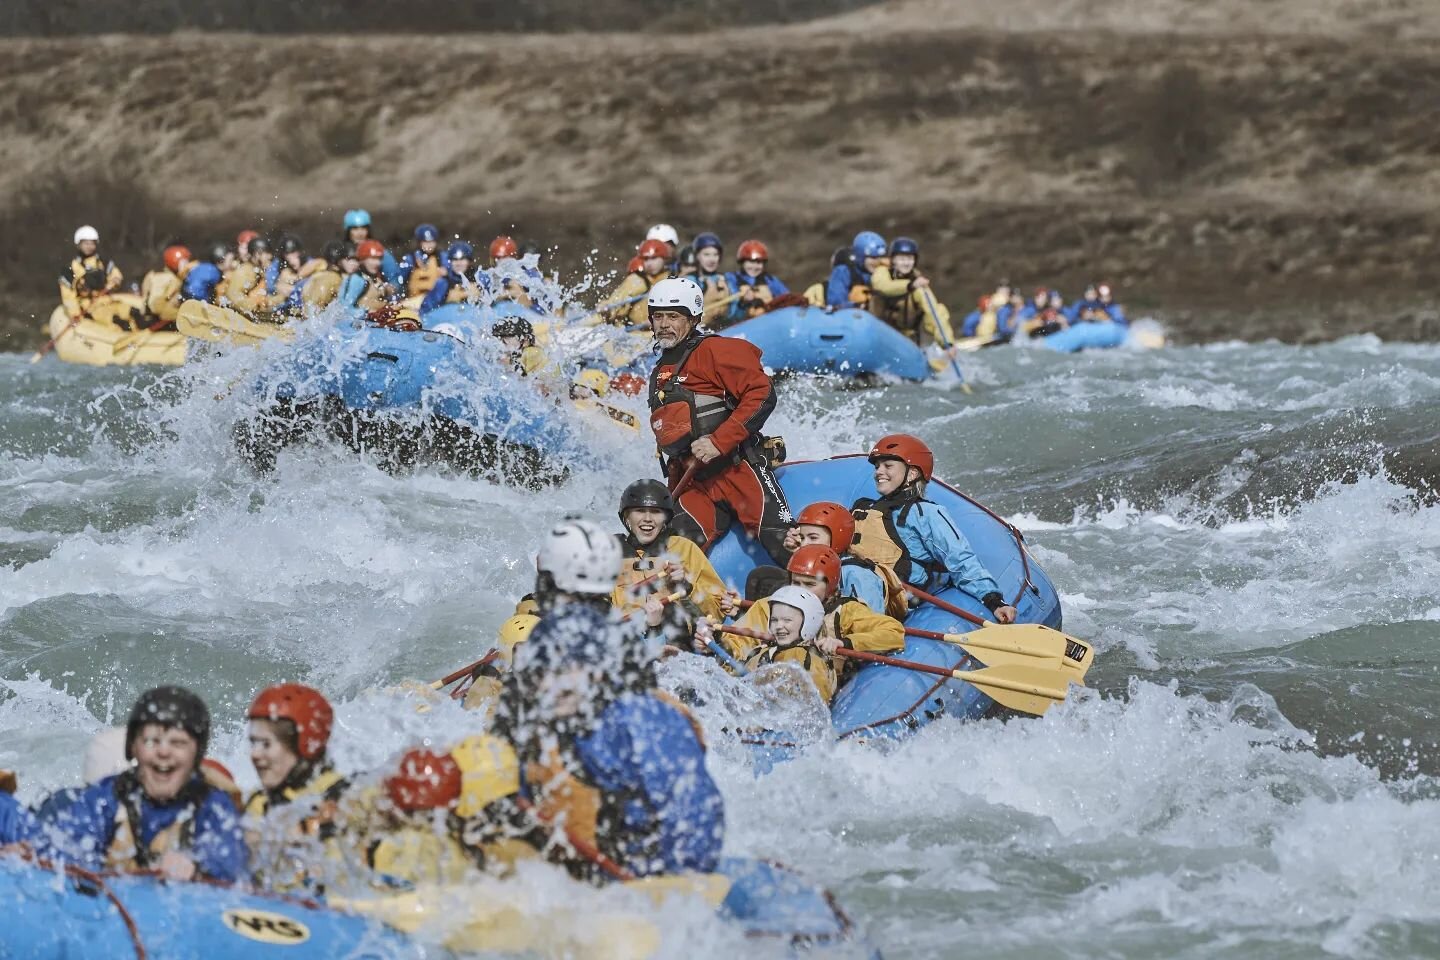 Are you looking for the perfect group activity? We can take groups up to 120 people 🤙 You can even top the day off with a Lamb BBQ, Burgers and Beer 🍻

Contact us via email ( info@arcticrafting.is) for more information 

#riverrafting #groupactivit